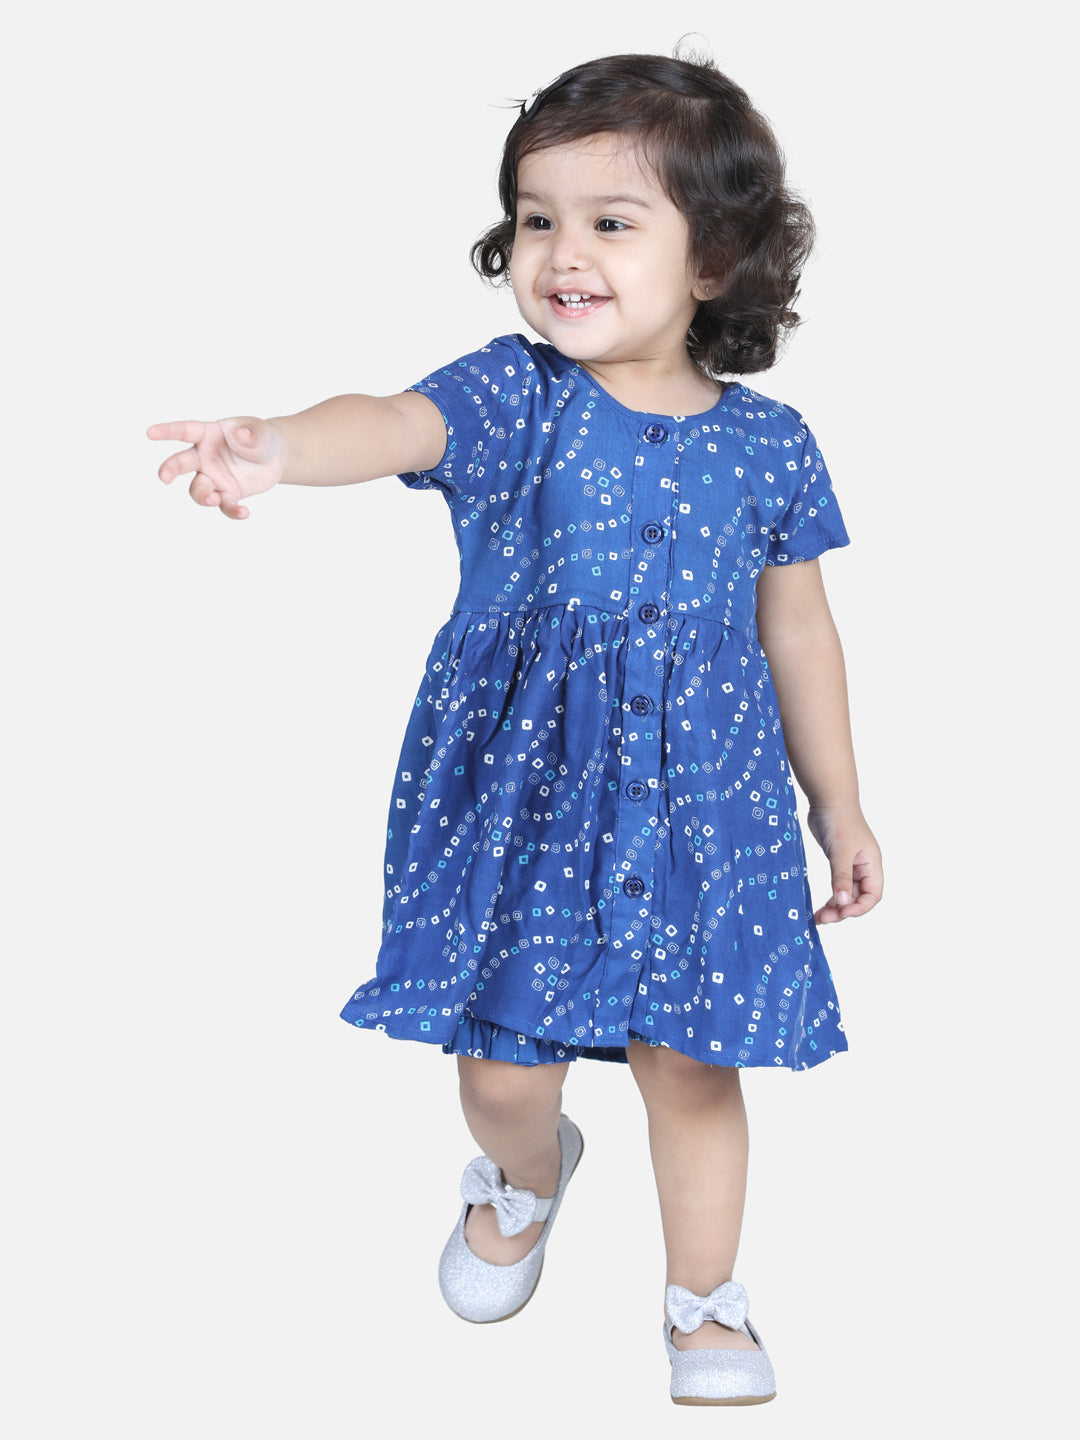 BownBee Infant Cotton Jhabla With Bloomer - Blue